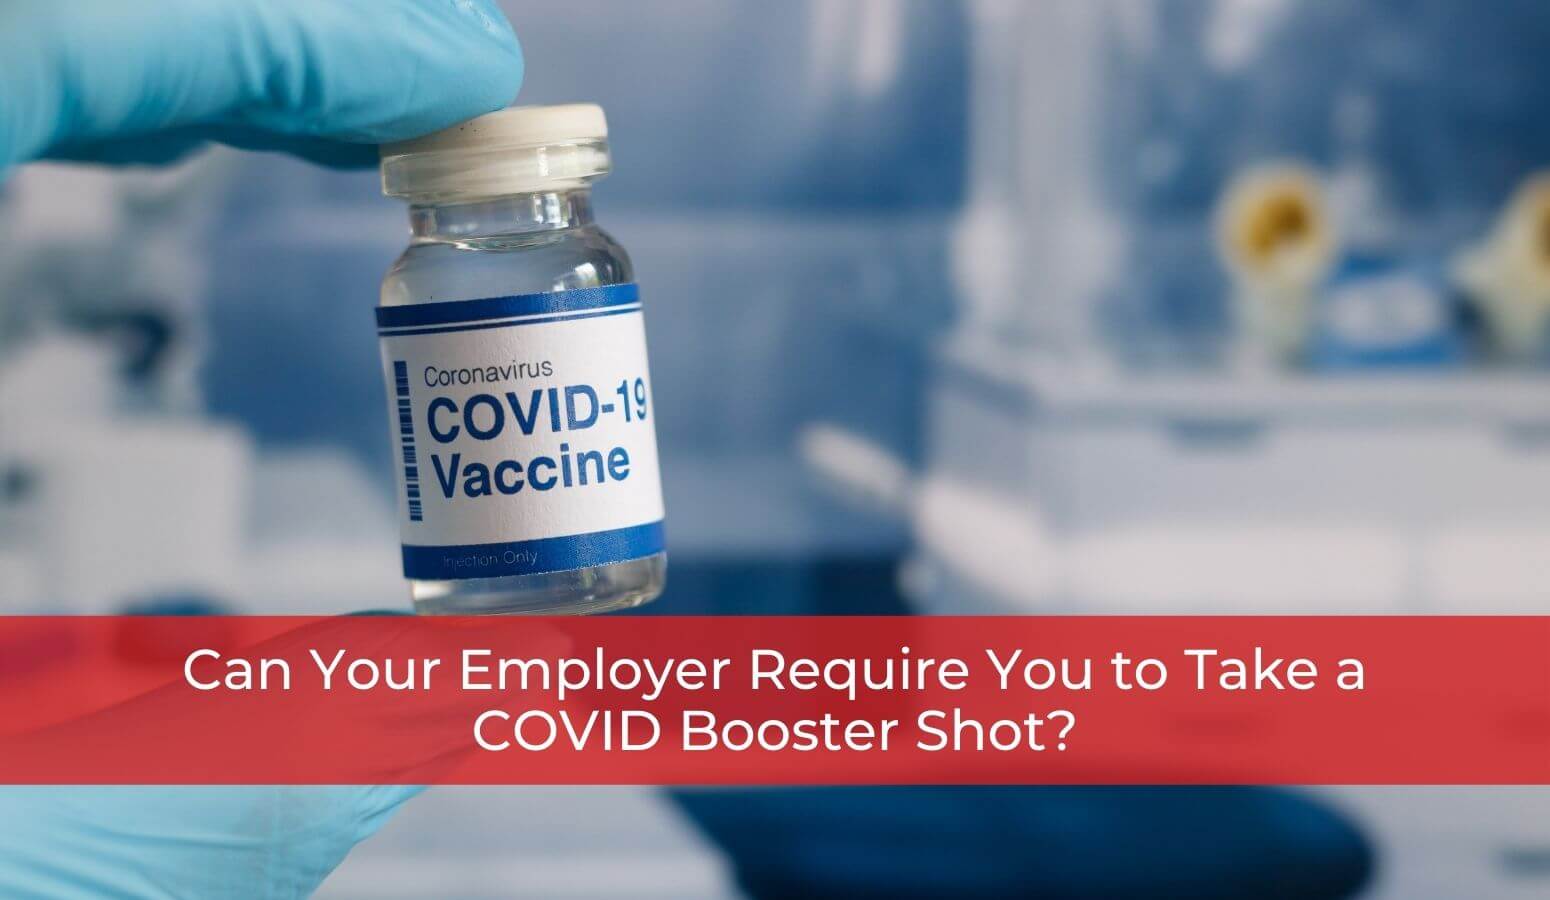 Featured image for “Can Your Employer Require You to Take a COVID Booster Shot?”